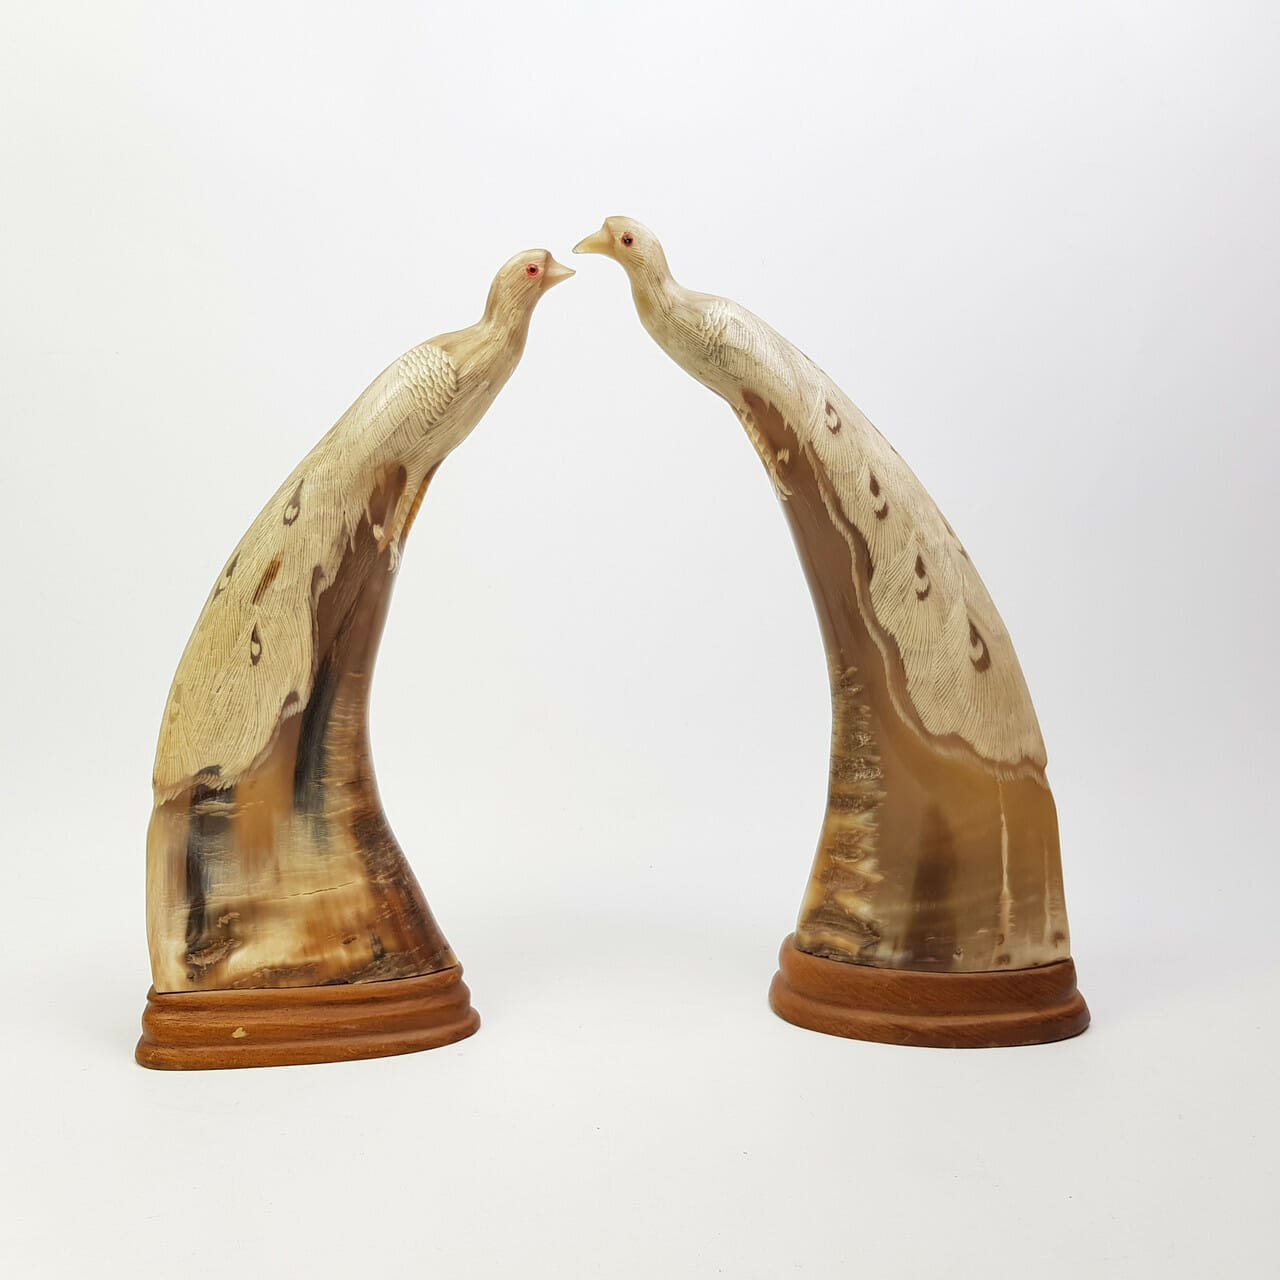 PAIR OF CARVED HORN PEACOCKS #42837